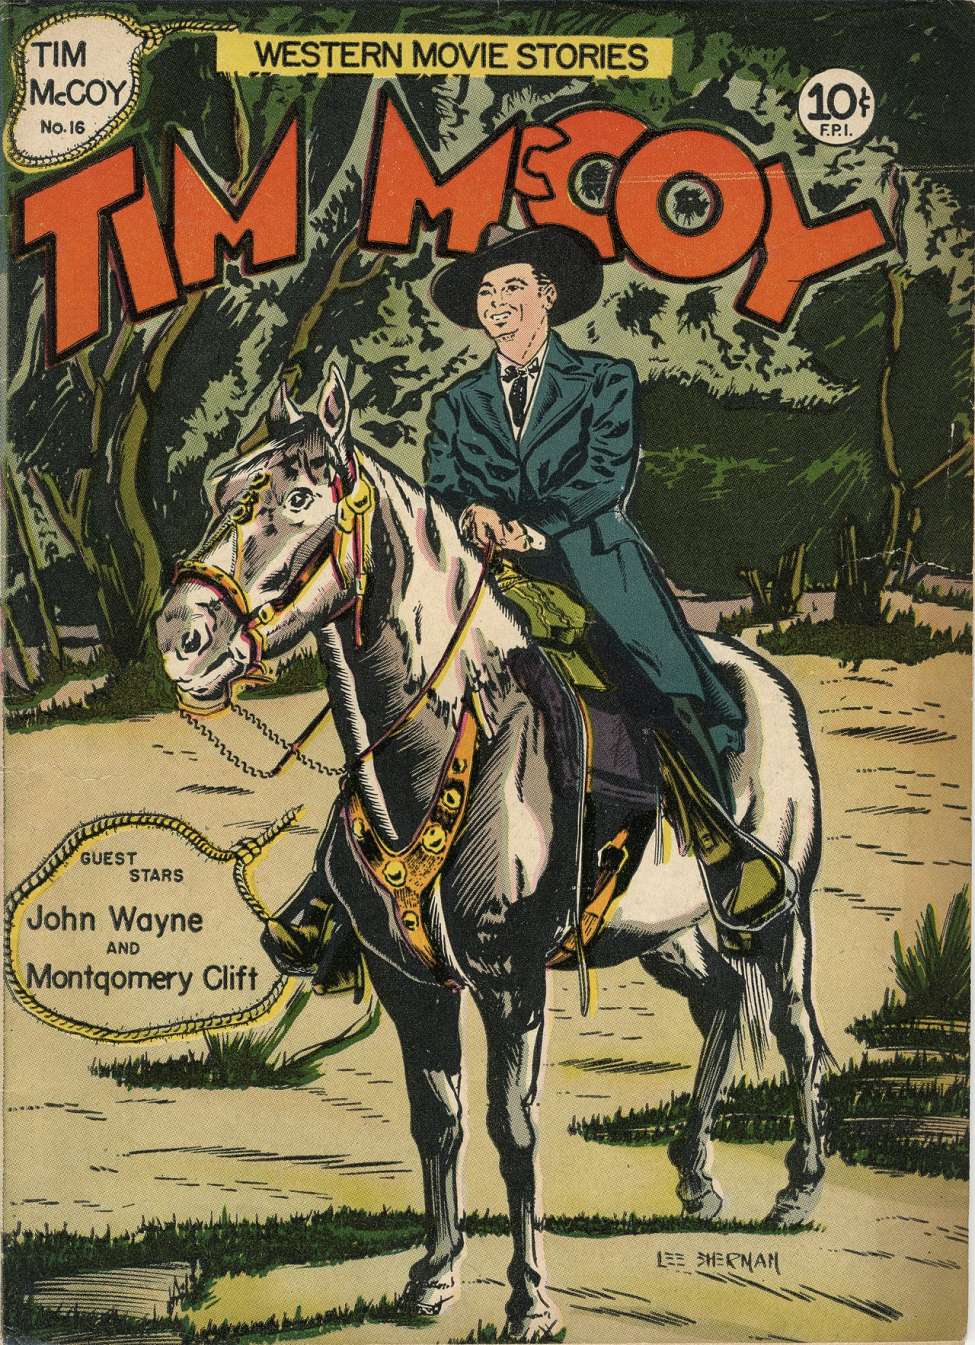 Book Cover For Tim McCoy 16